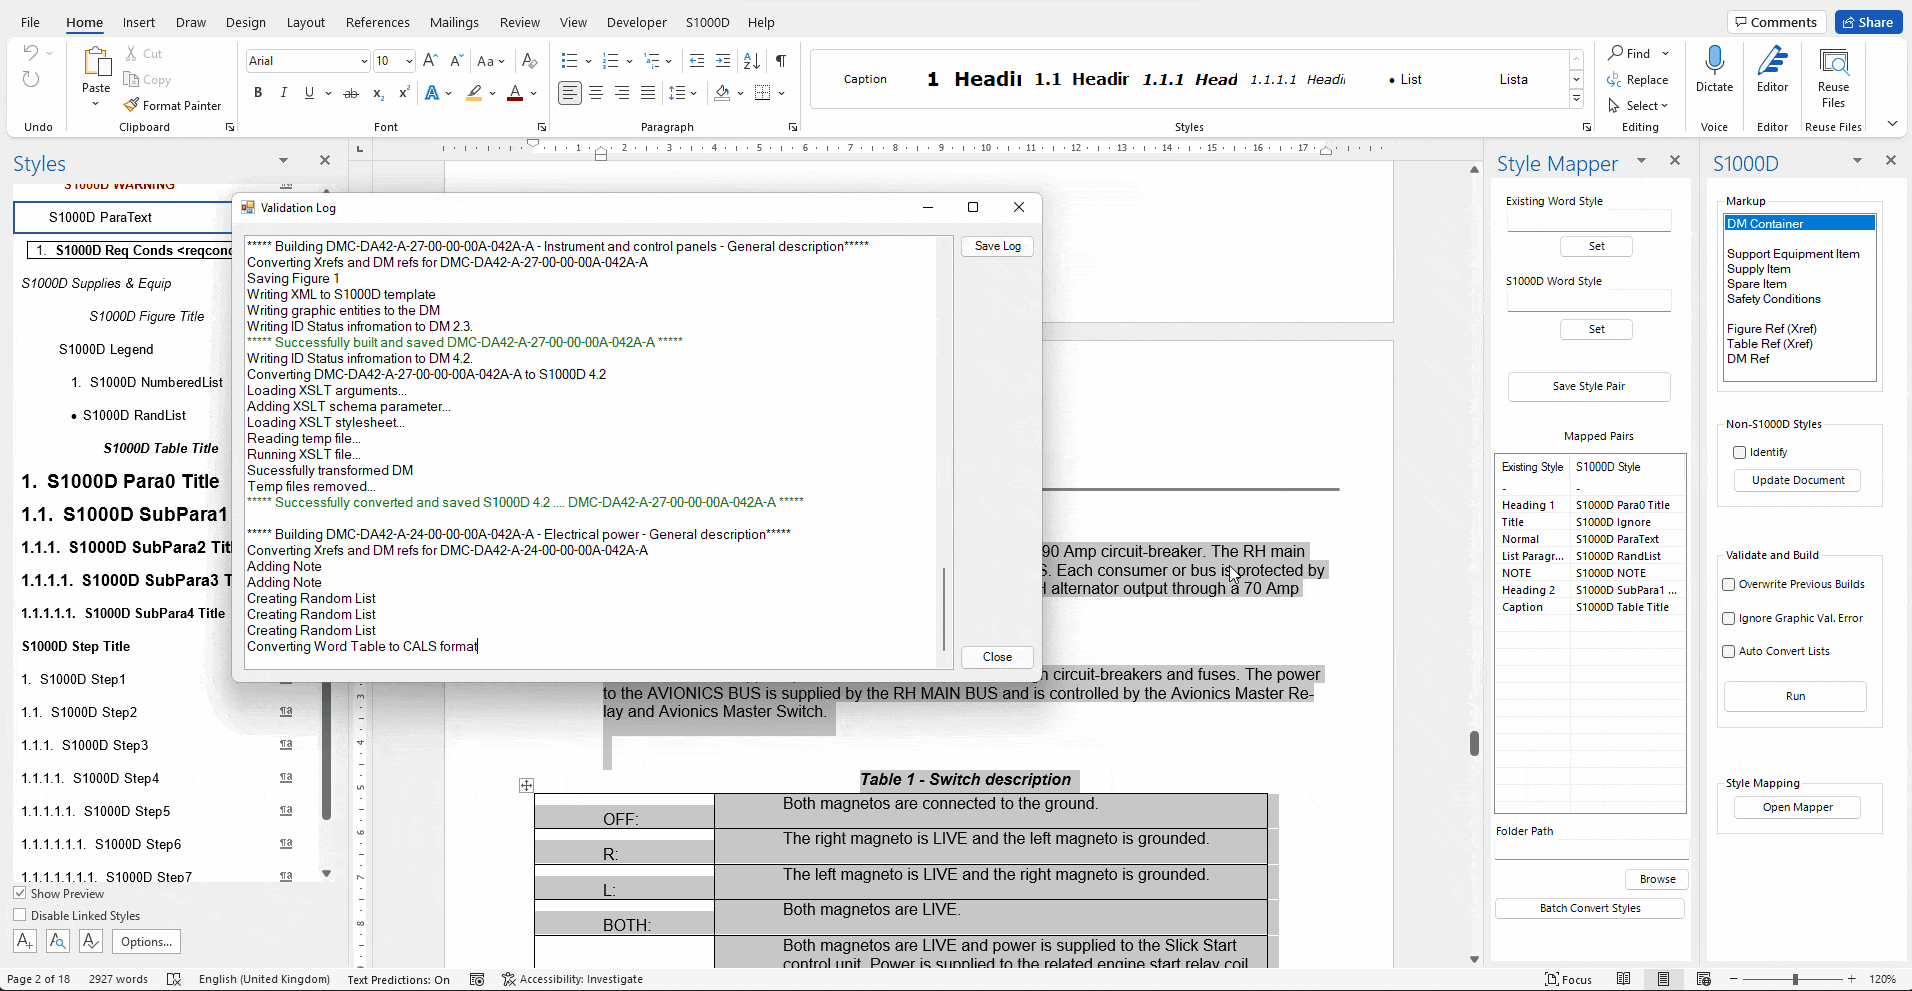 Quick, simple and integrated into Microsoft Word